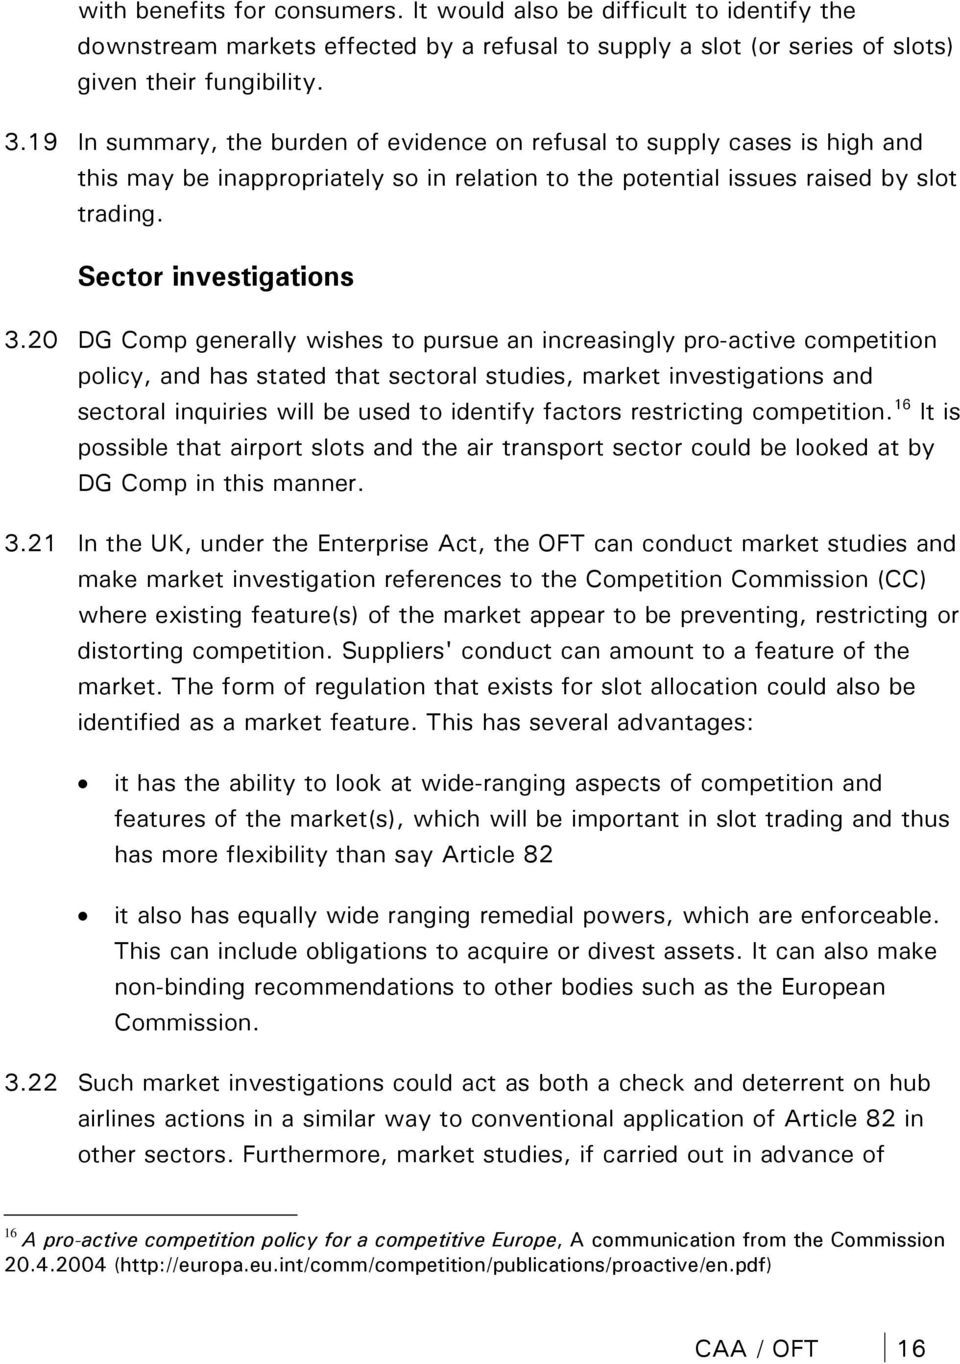 20 DG Comp generally wishes to pursue an increasingly pro-active competition policy, and has stated that sectoral studies, market investigations and sectoral inquiries will be used to identify